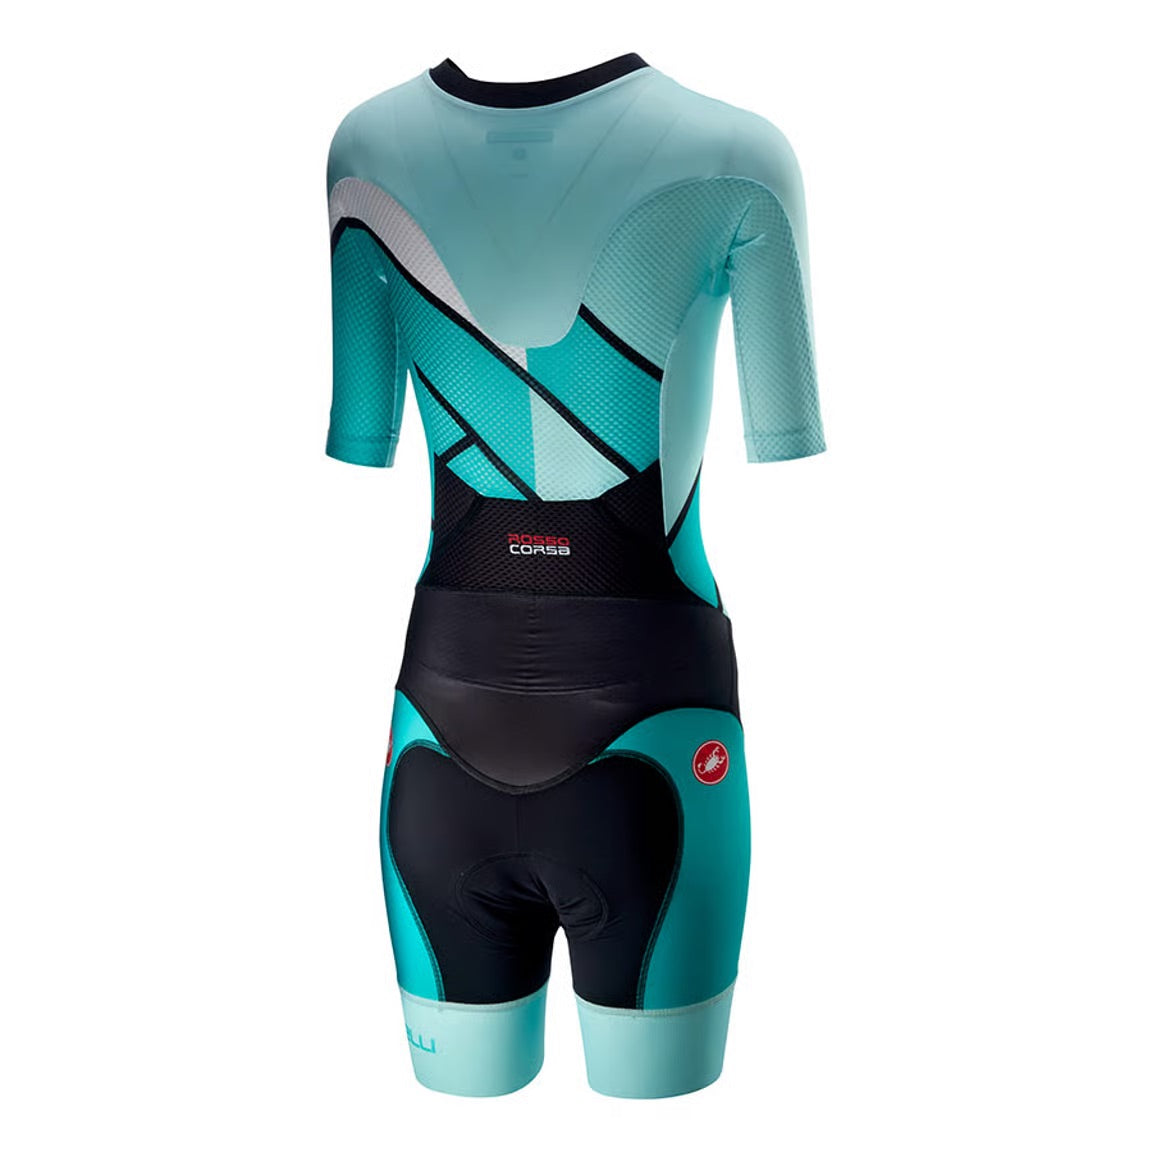 TRI CASTELLI ALL OUT W SPEED SUIT